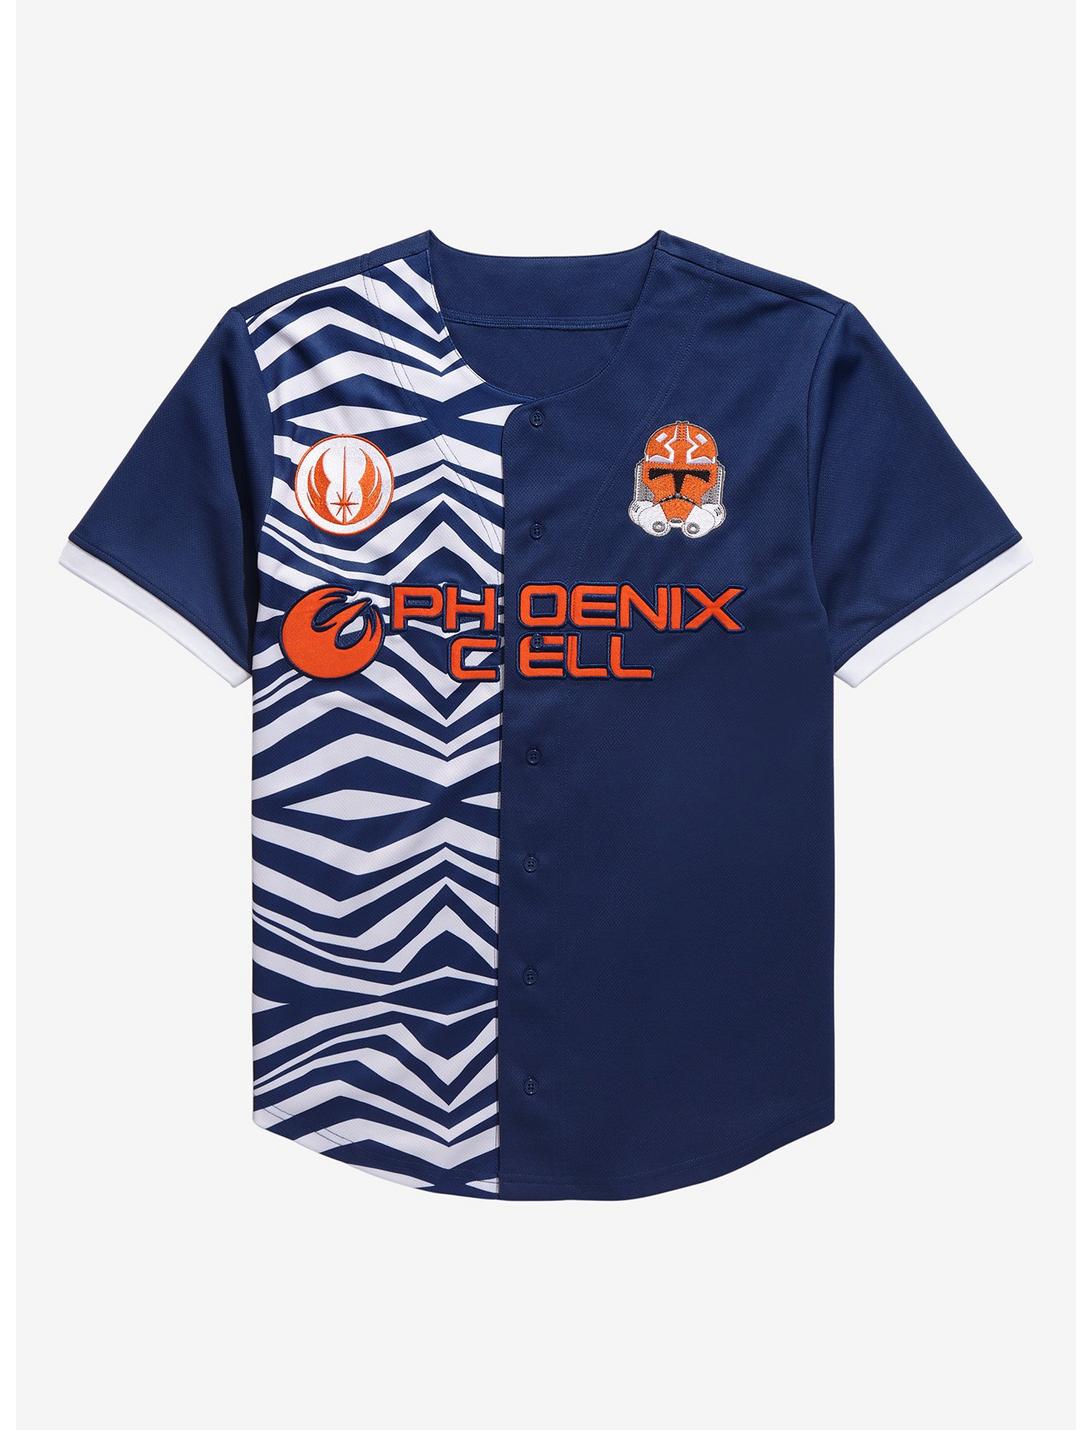 Her Universe Star Wars: The Clone Wars Ahsoka Tano Phoenix Cell Baseball Jersey - BoxLunch Exclusive, BLUE, hi-res